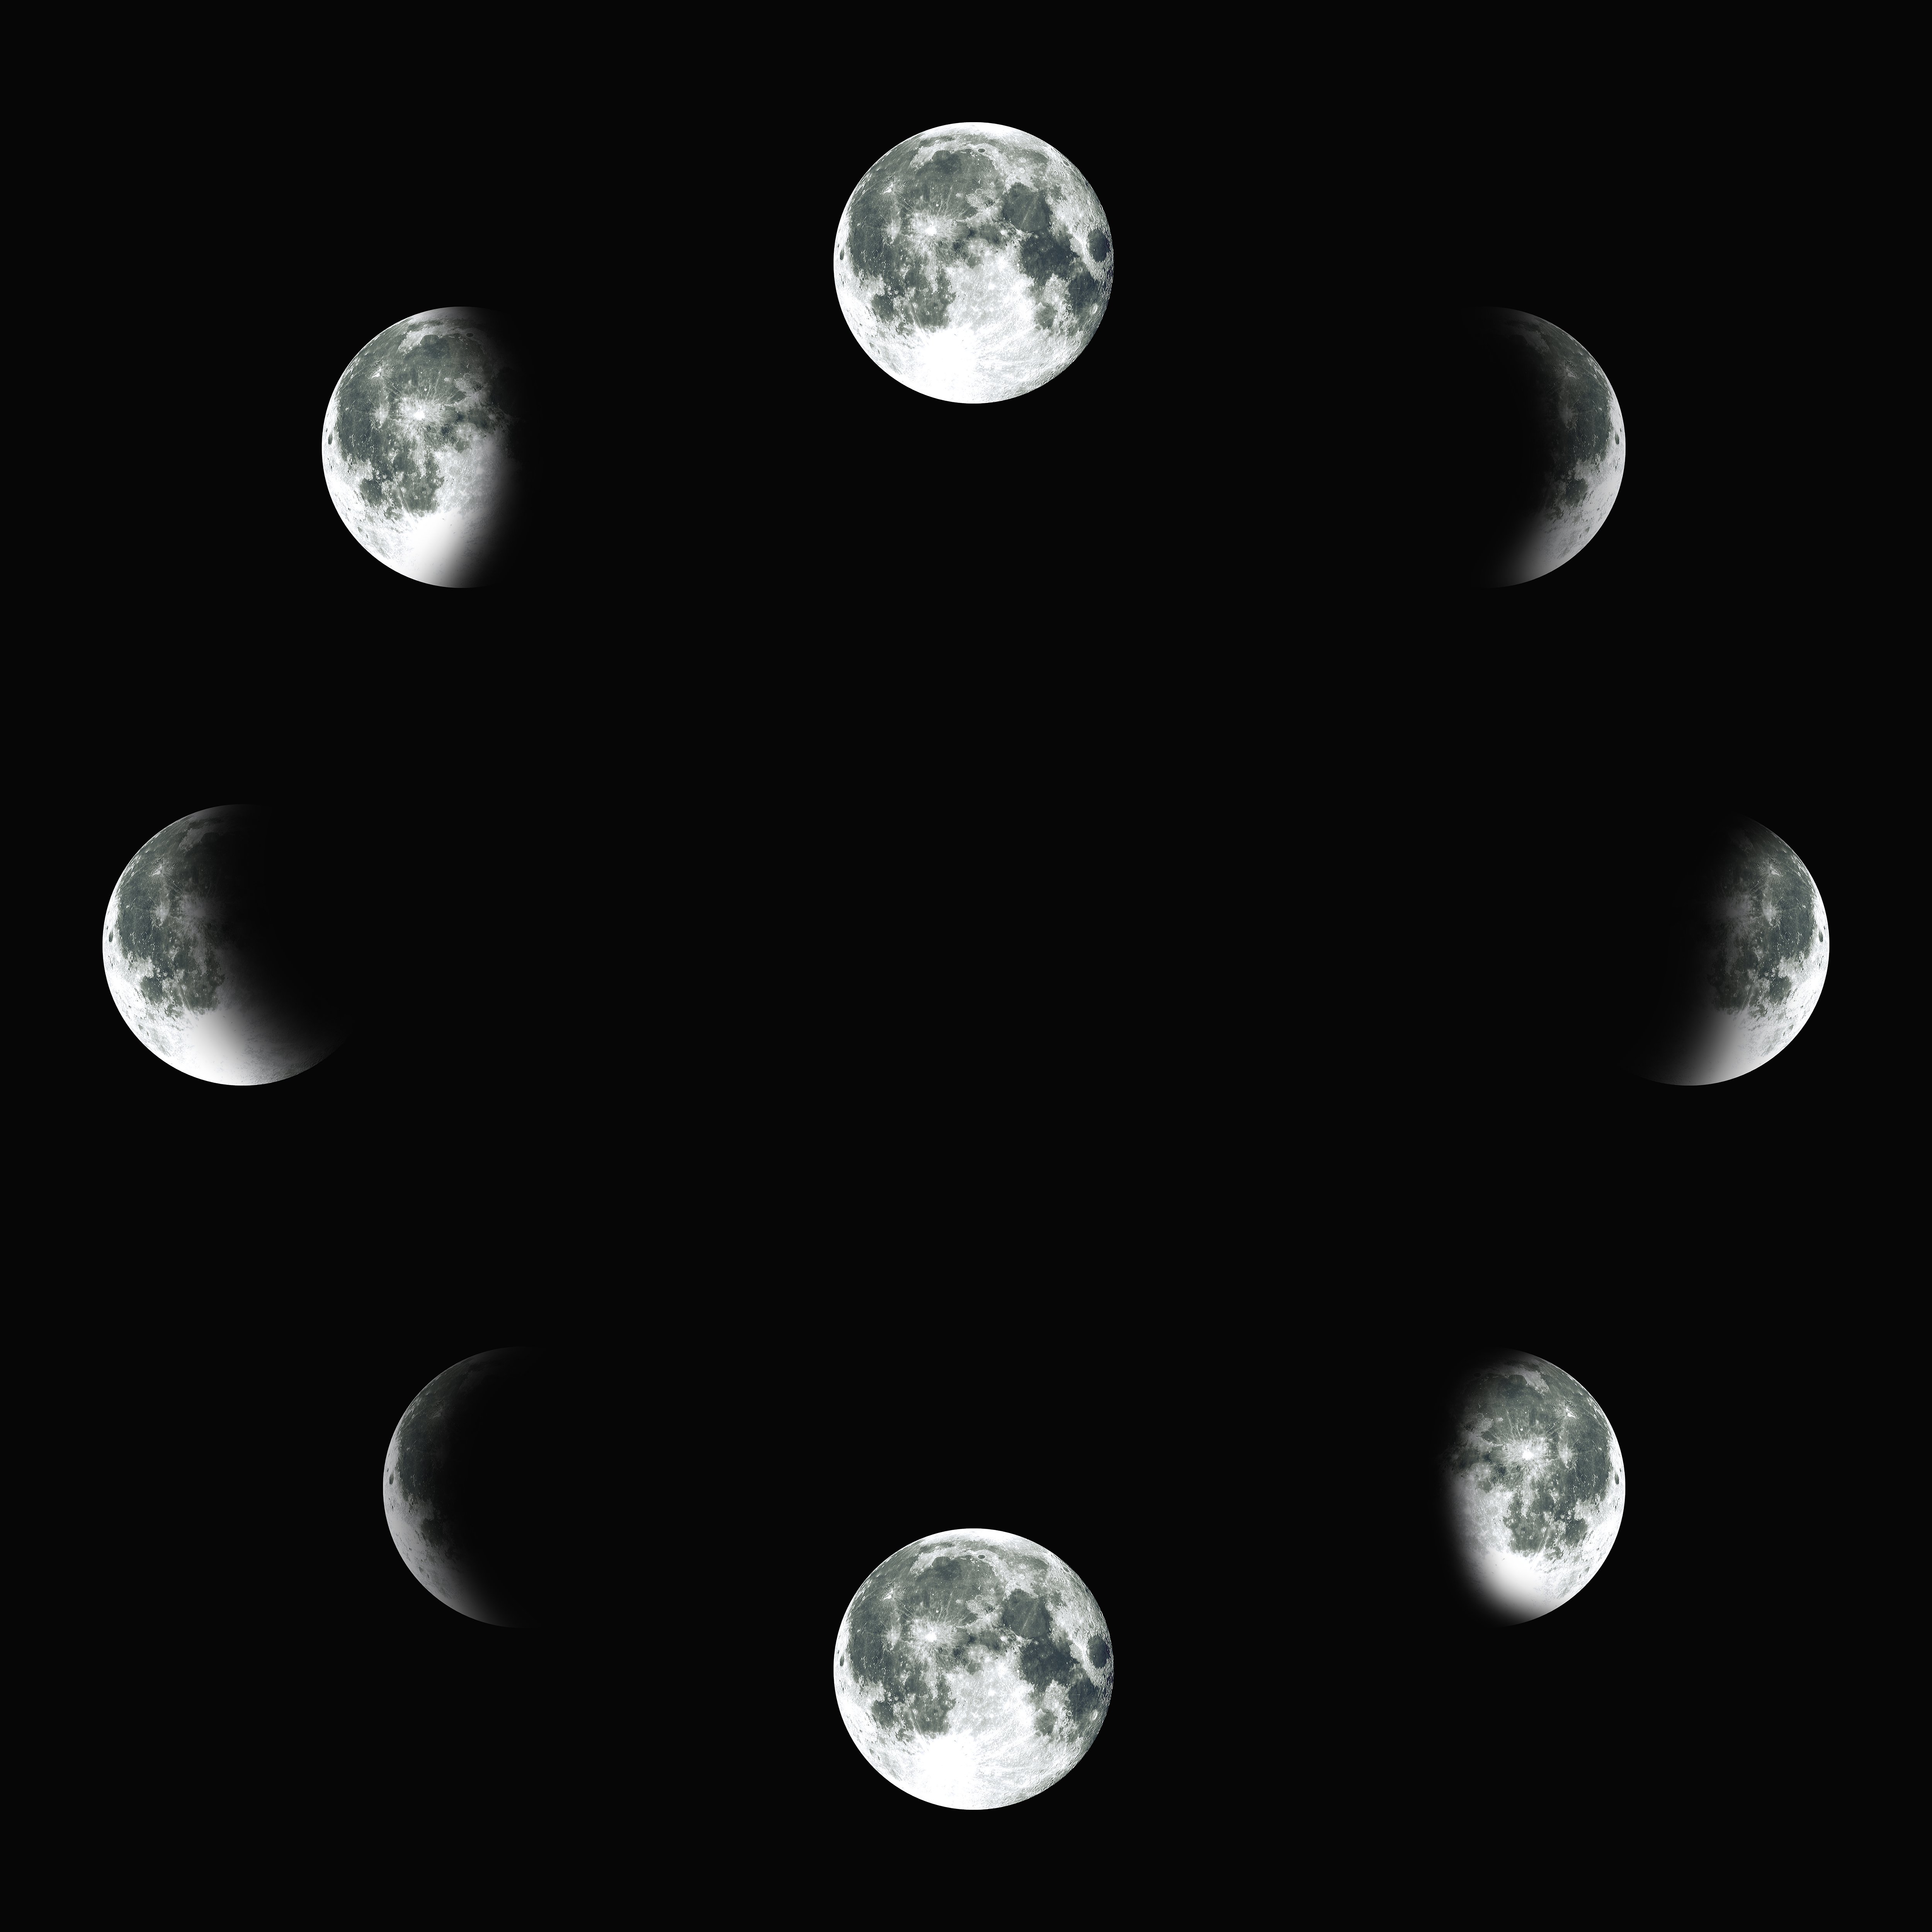 The phases of the Moon. | Source: Getty Images